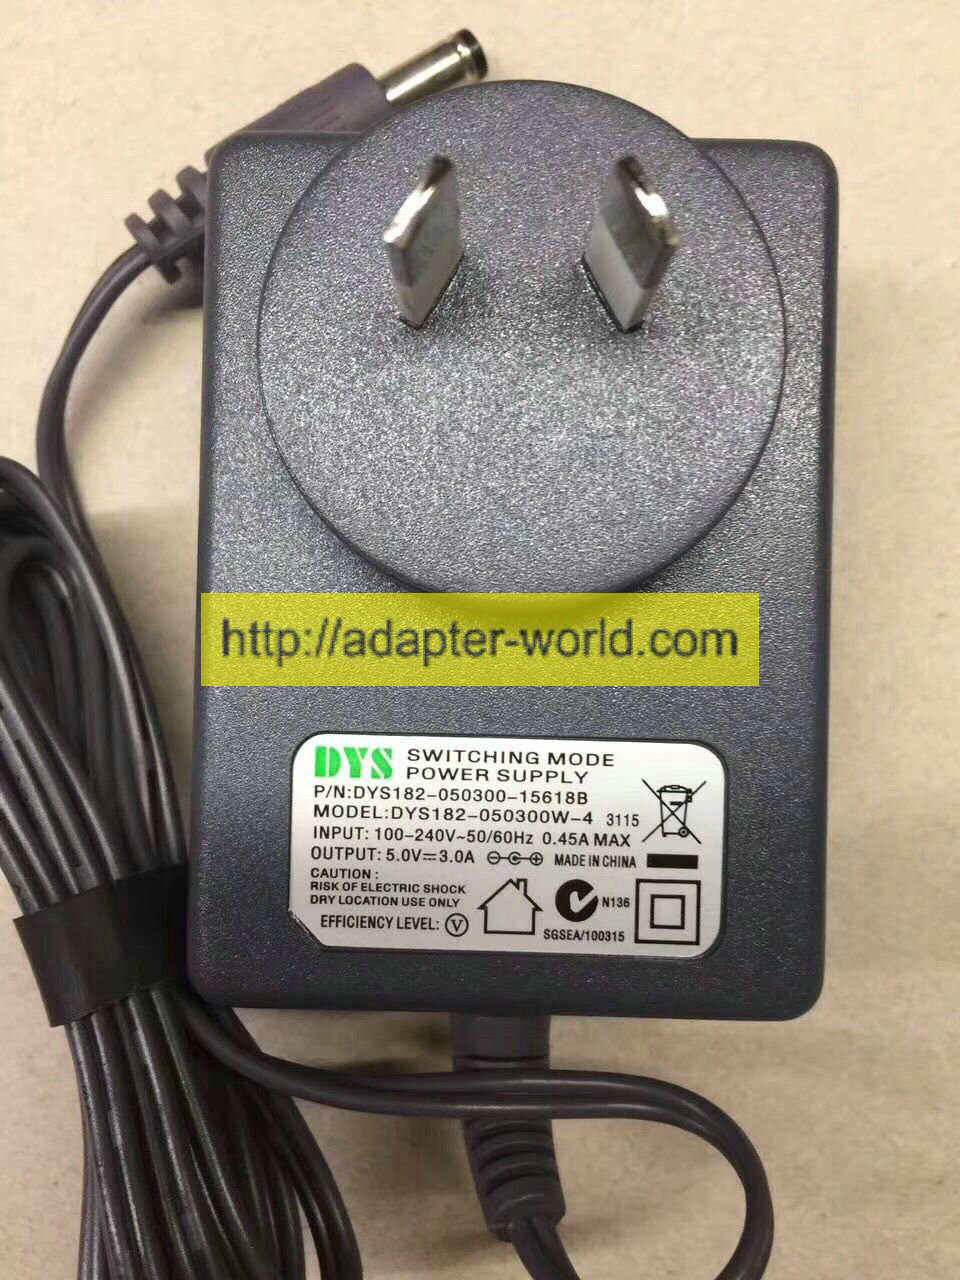 *100% Brand NEW* DYS DYS182-050300W-4 3115 DYS182-050300-15618B 5.0V--3.0A AC/DC Adapter Power Adapter Free sh - Click Image to Close